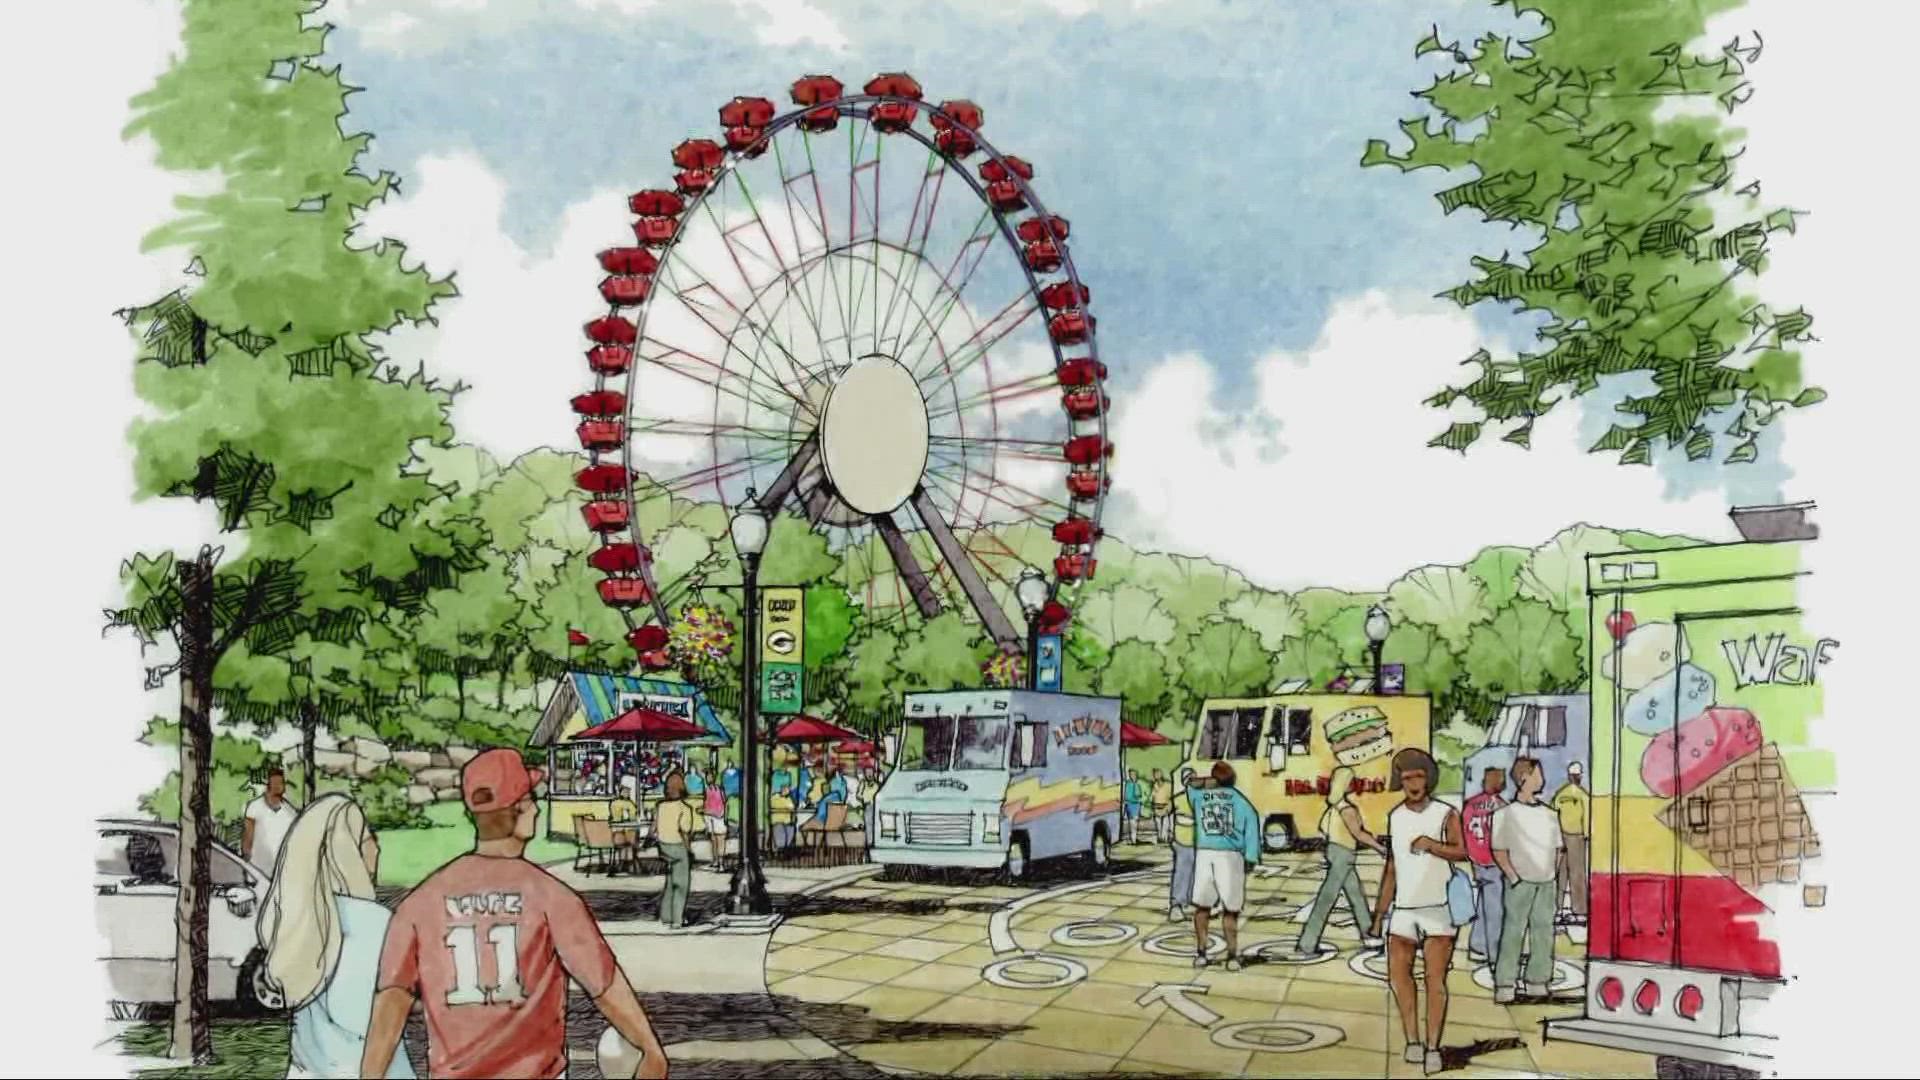 The iconic Ferris wheel is getting a fresh home in Canton at the Hall of Fame Village.